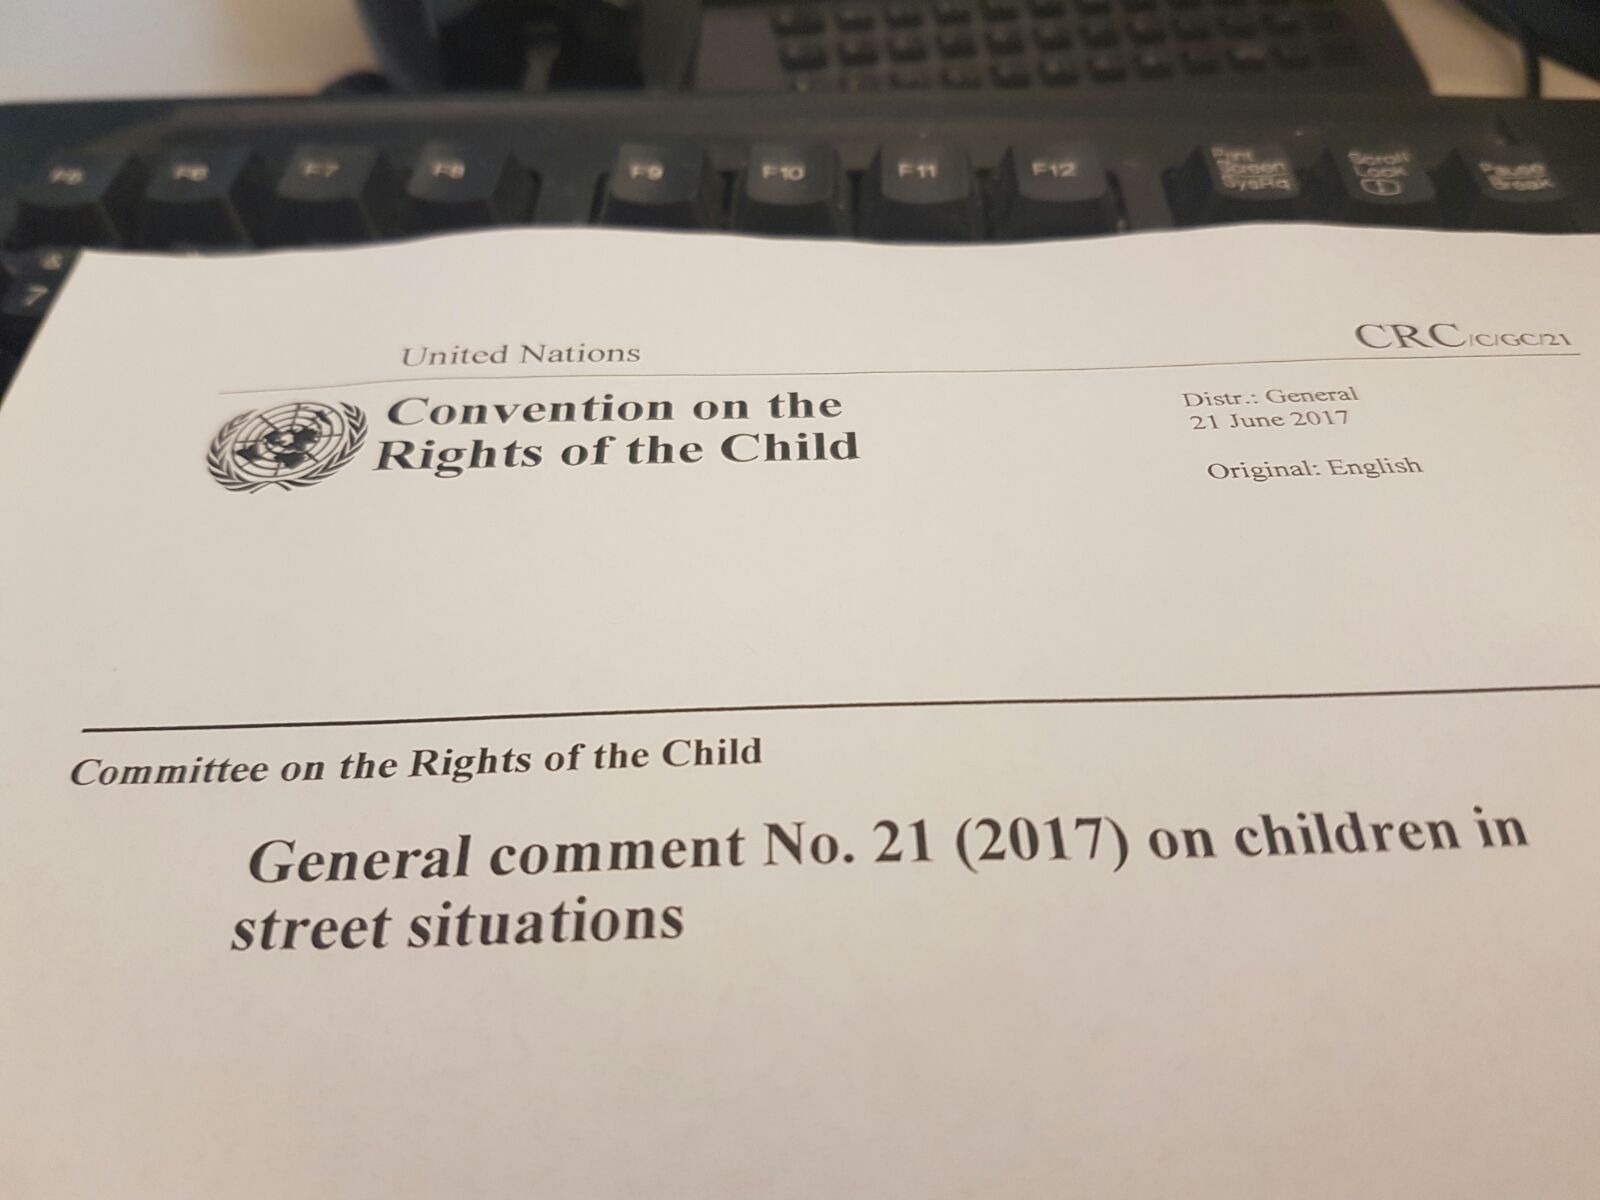 UN Committee to governments: institutionalisation of children in street situations should be a last resort